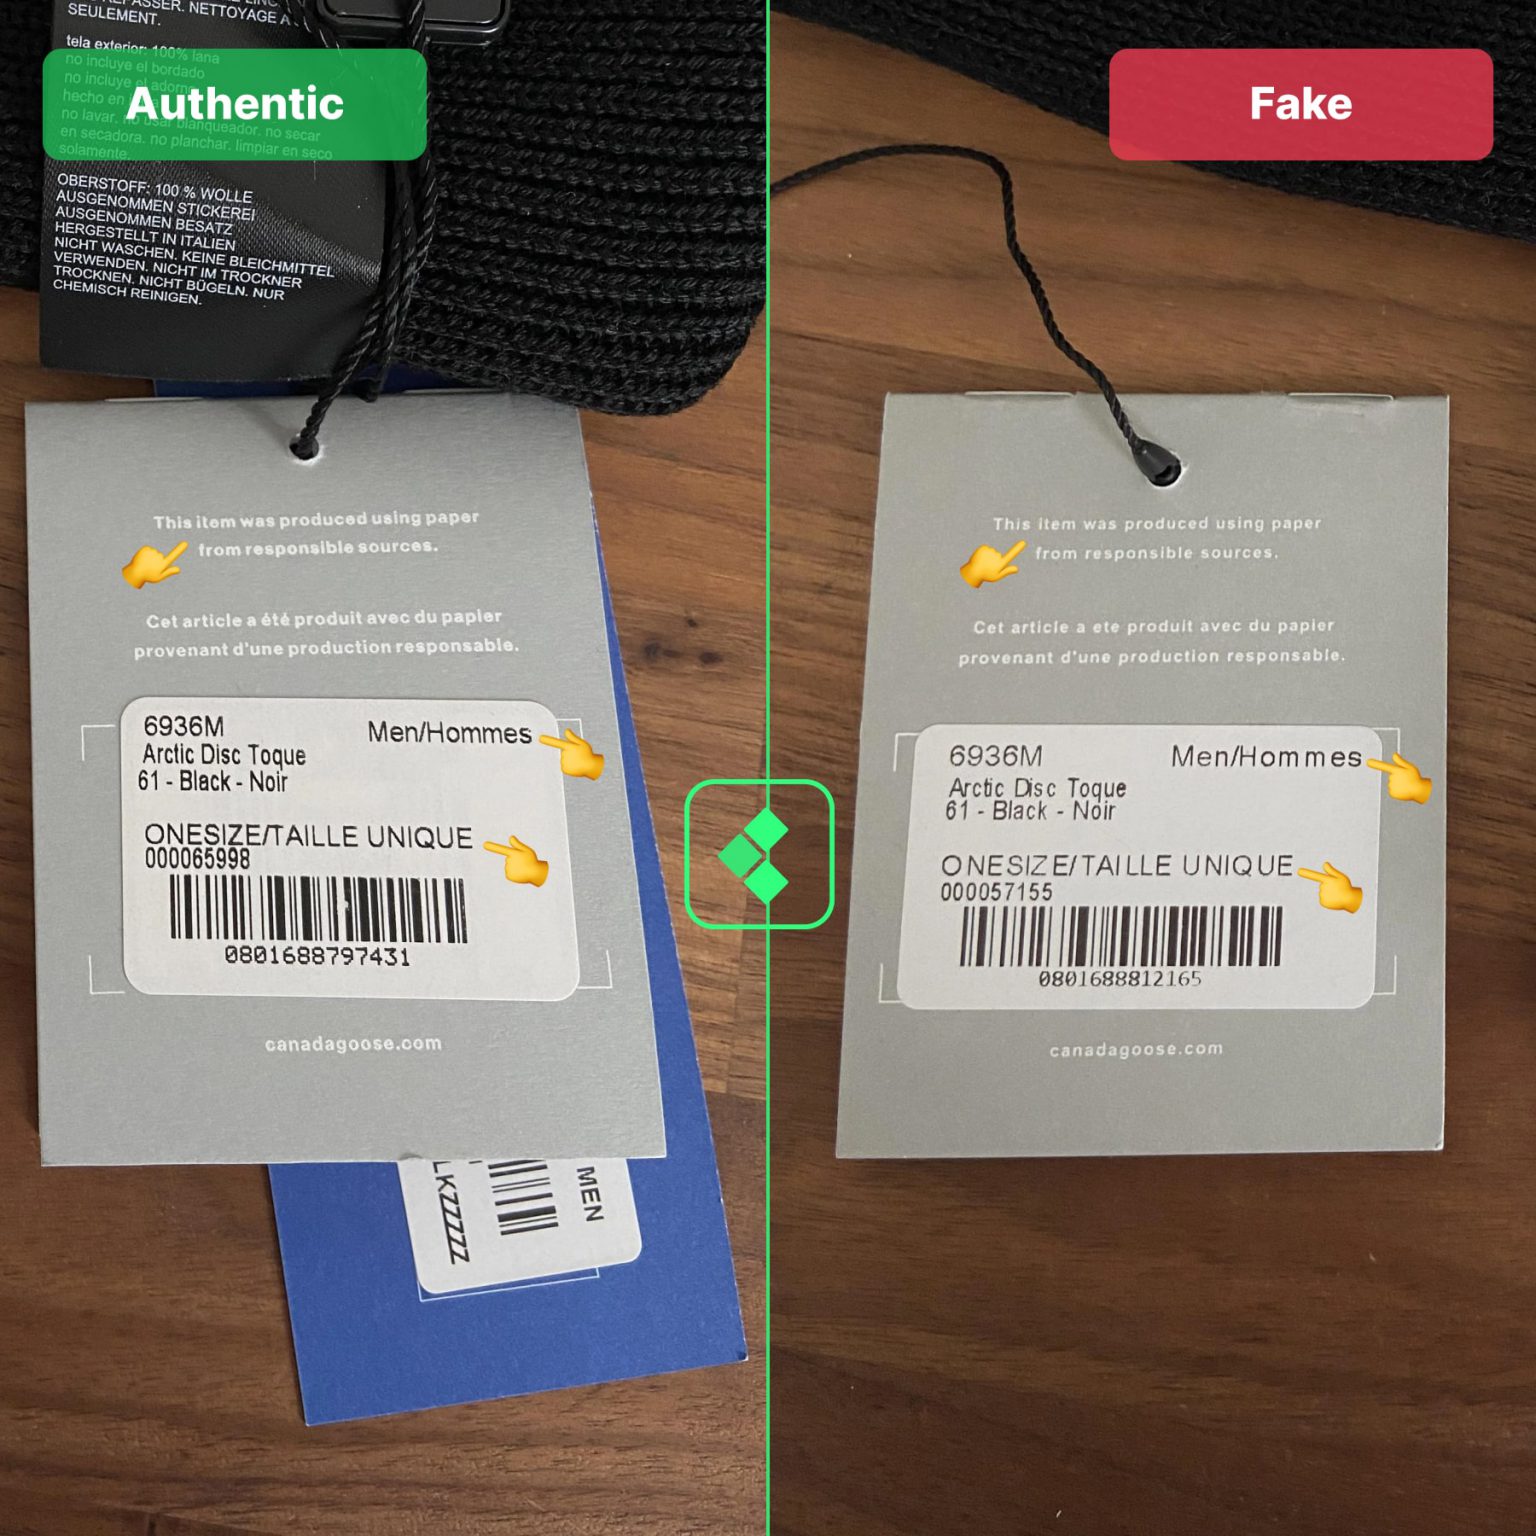 Canada Goose Legit Check: How To Spot Fake Vs Real